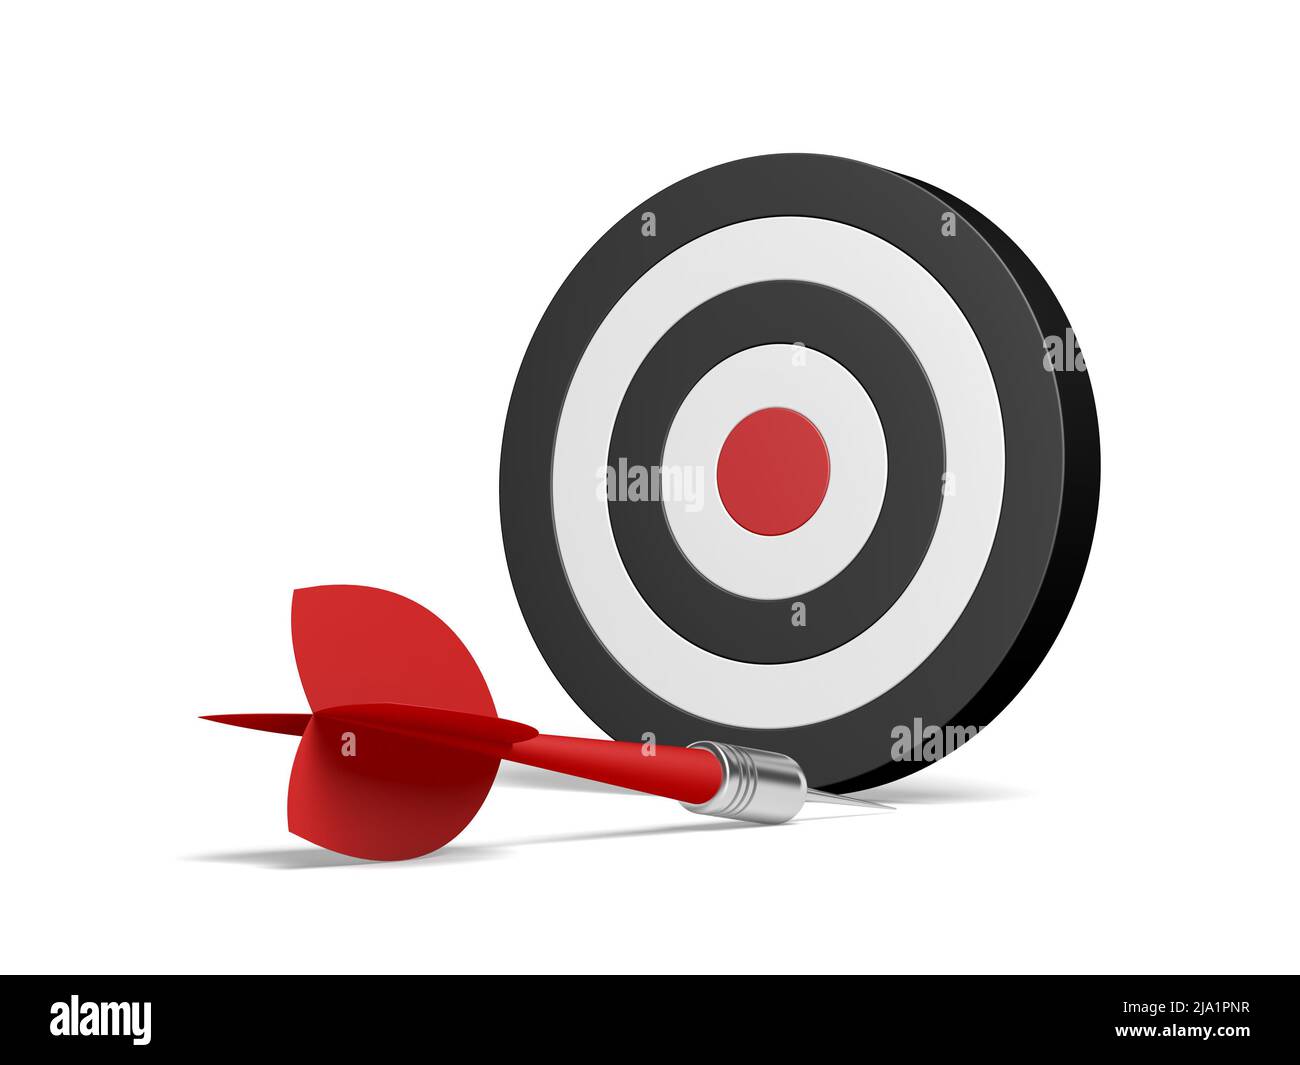 Dart and dartboard isolated on white background. Red dart missed the target. Failure concept. A missed opportunity. 3d illustration. Stock Photo